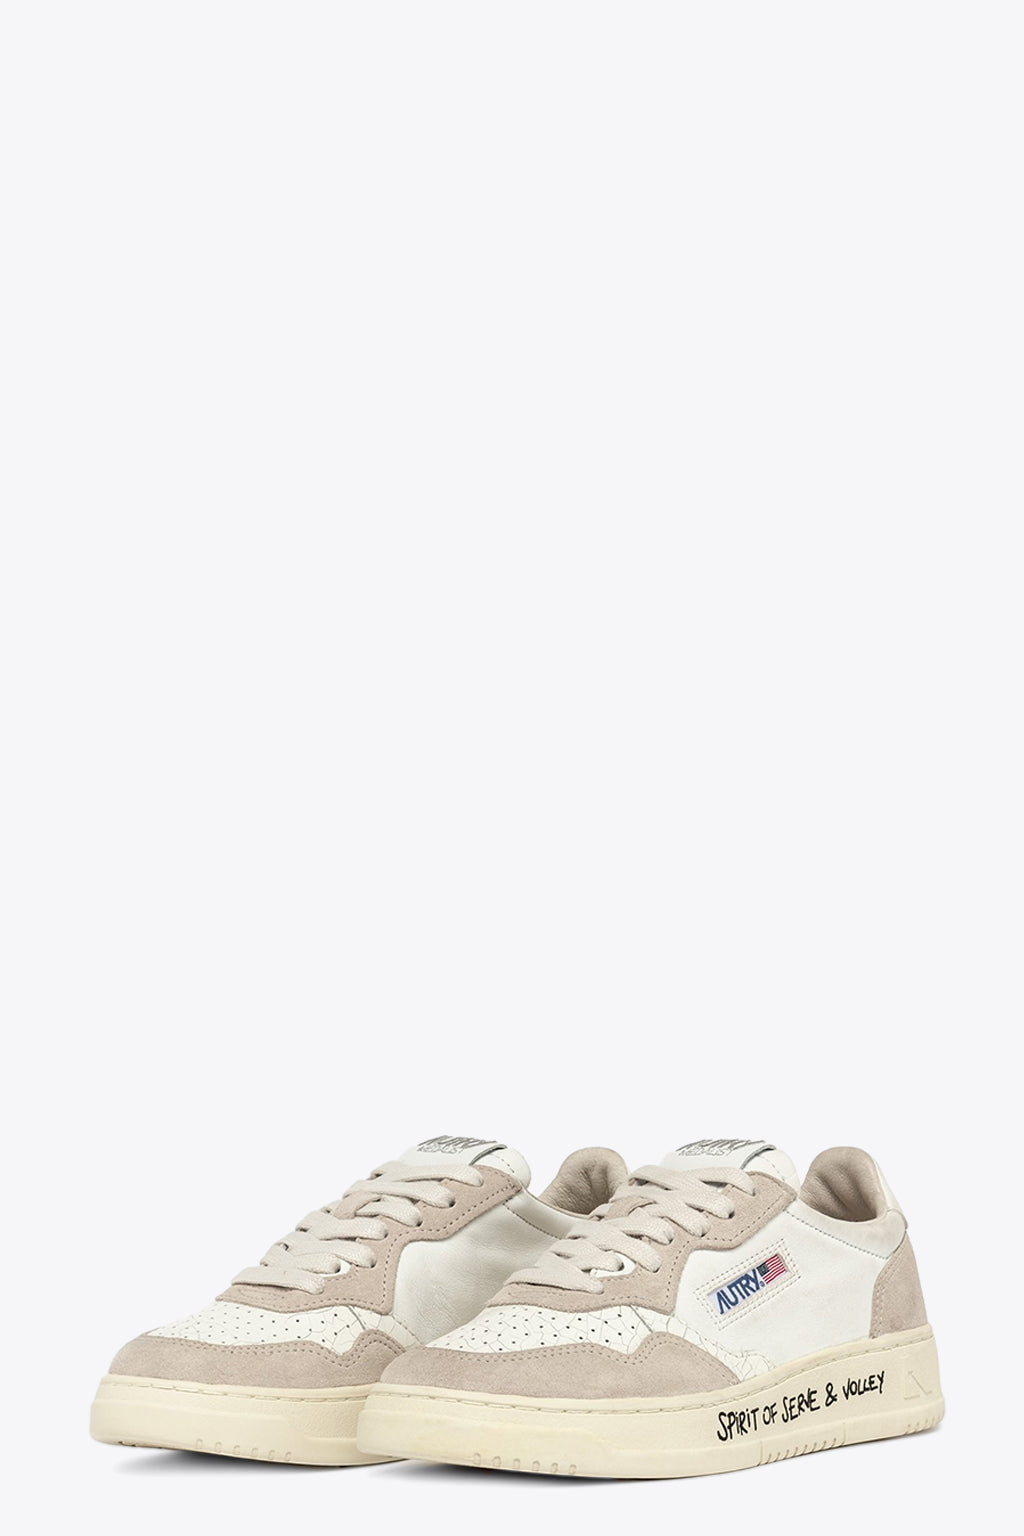 alt-image__White-leather-low-sneaker-with-back-logo-tab---Medalist